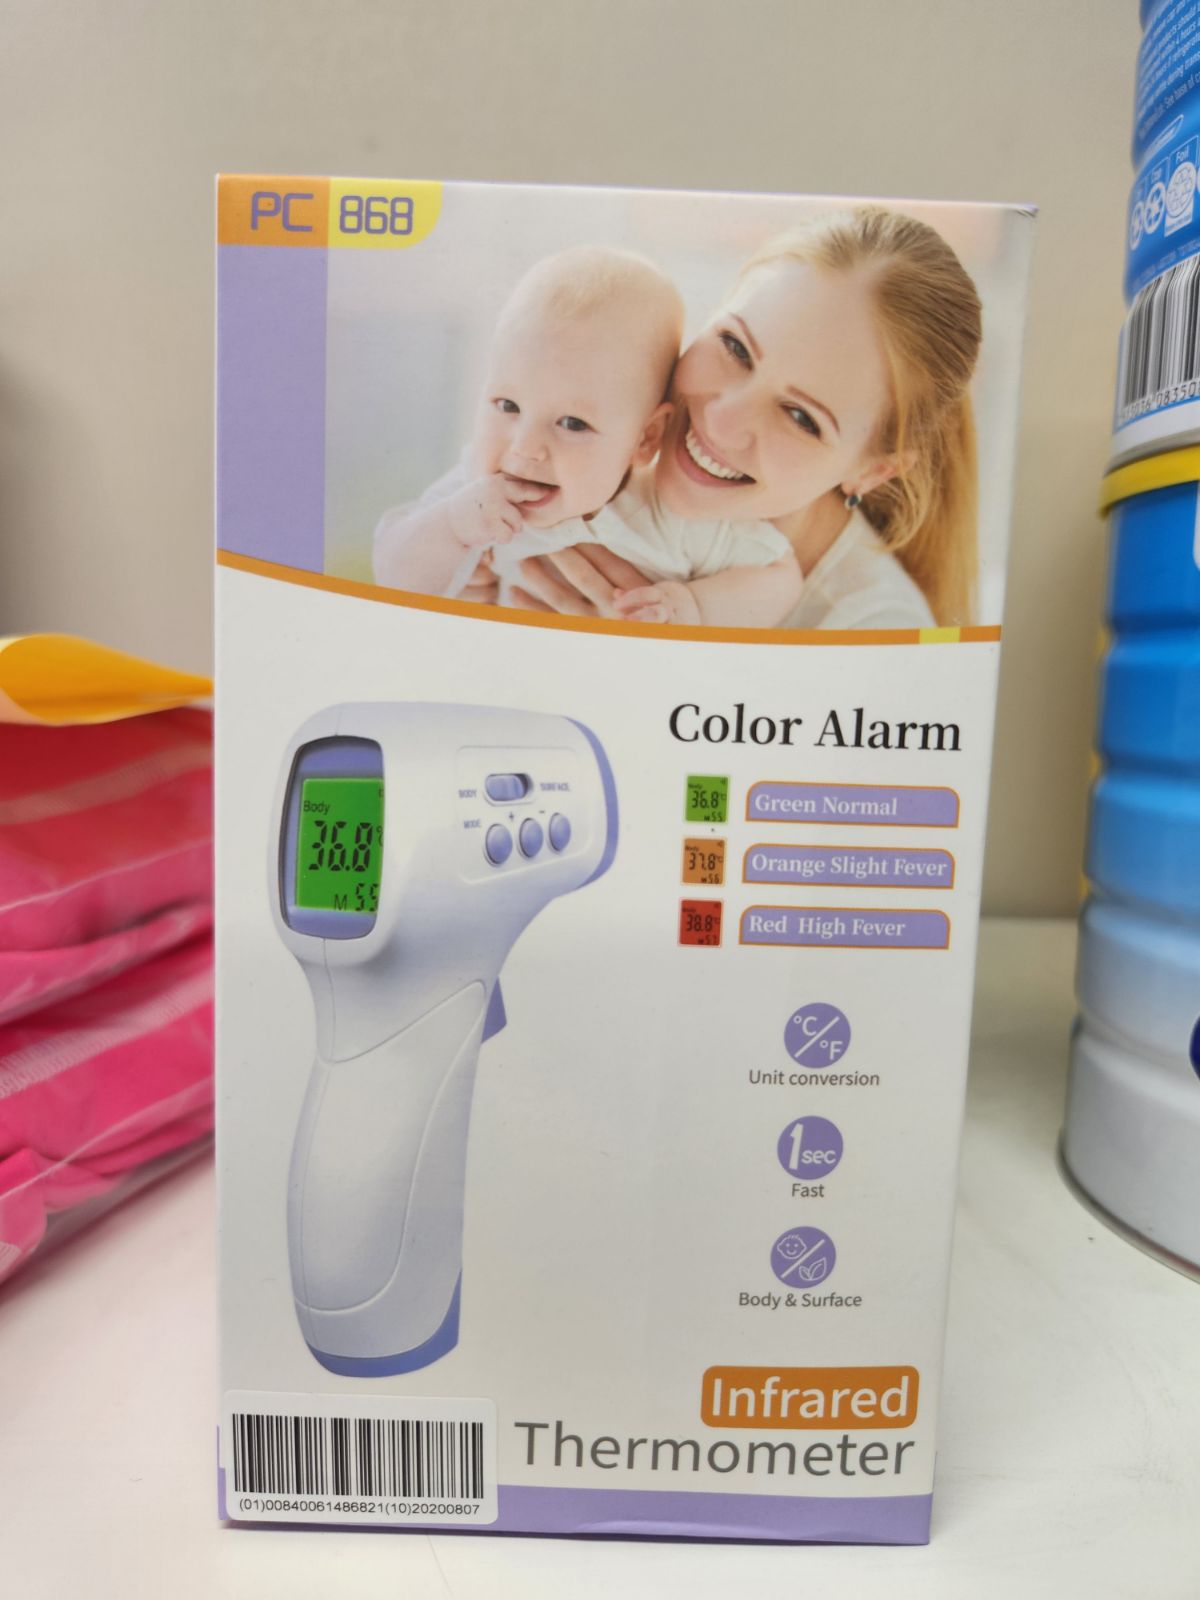 PC 868 -No-Touch Forehead Thermometer, Infrared Thermometer for Adults and Kids,Digital Infrared Thermometer